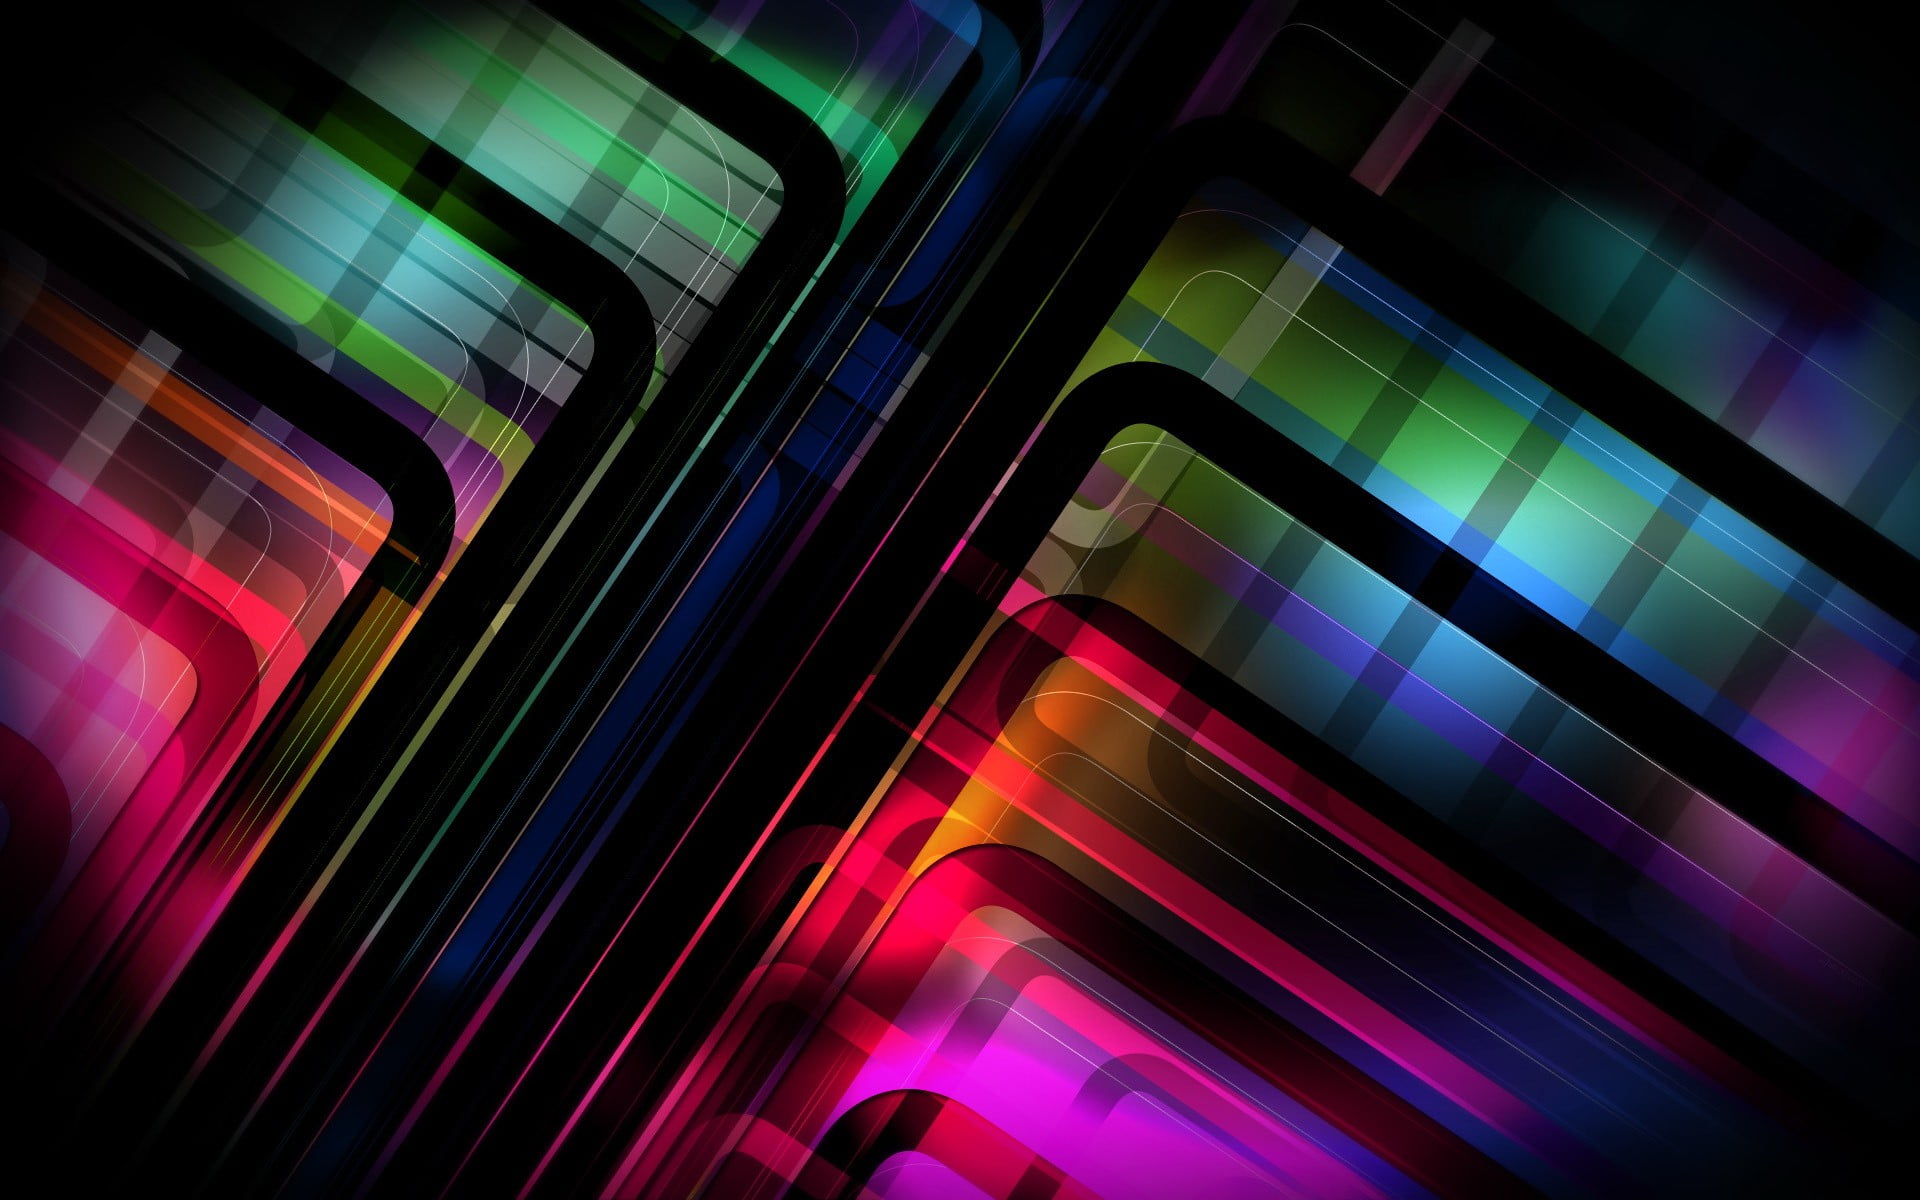 colorful, lines, abstract, digital art, illuminated, architecture